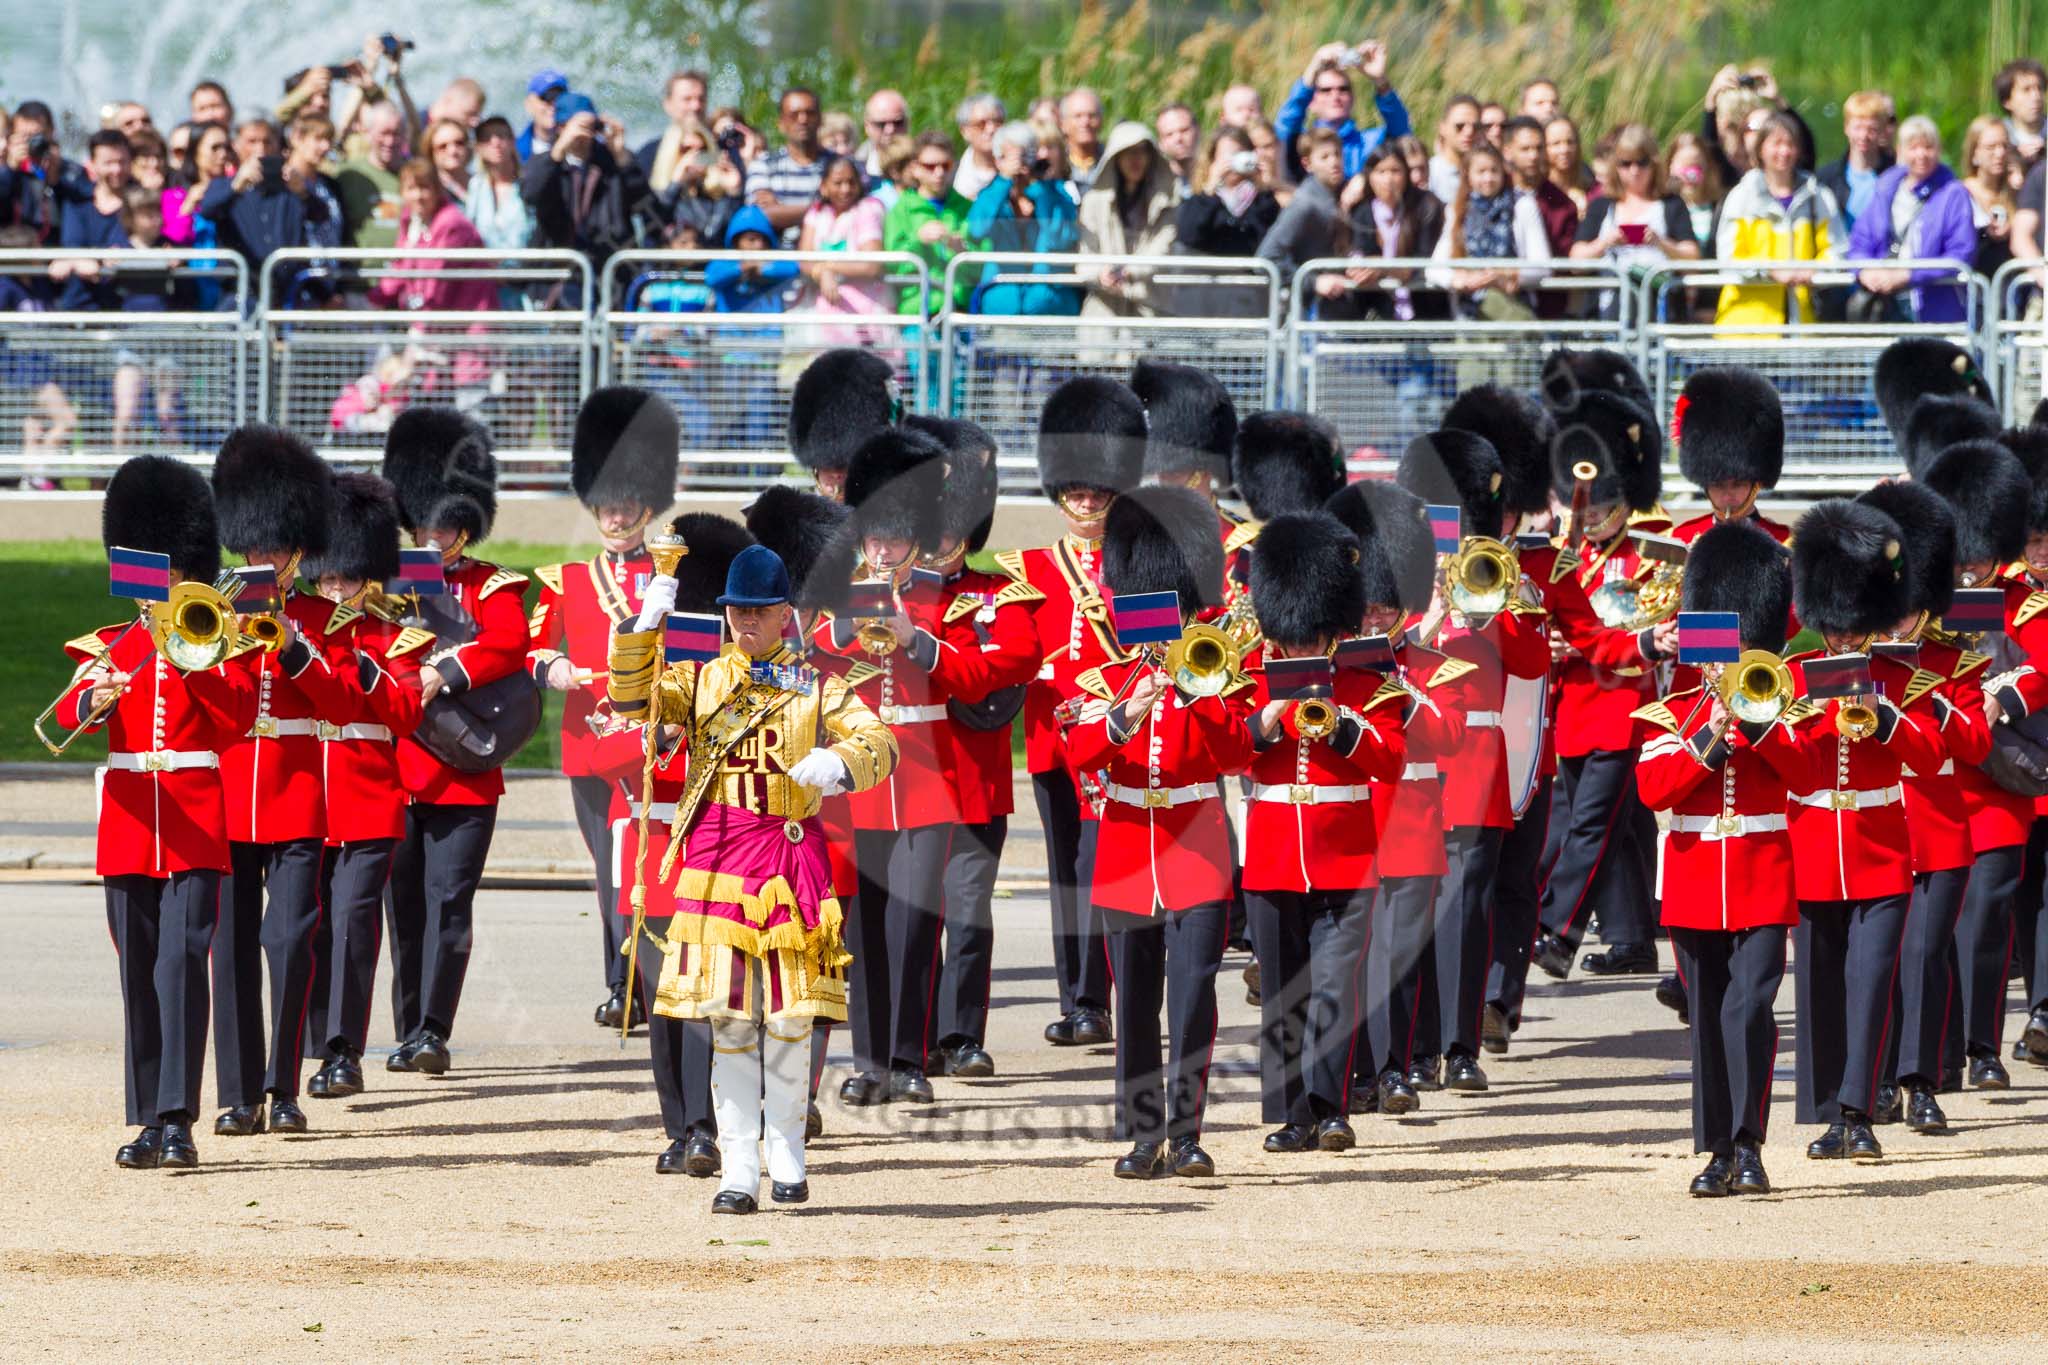 The Colonel's Review 2015.
Horse Guards Parade, Westminster,
London,

United Kingdom,
on 06 June 2015 at 10:31, image #92